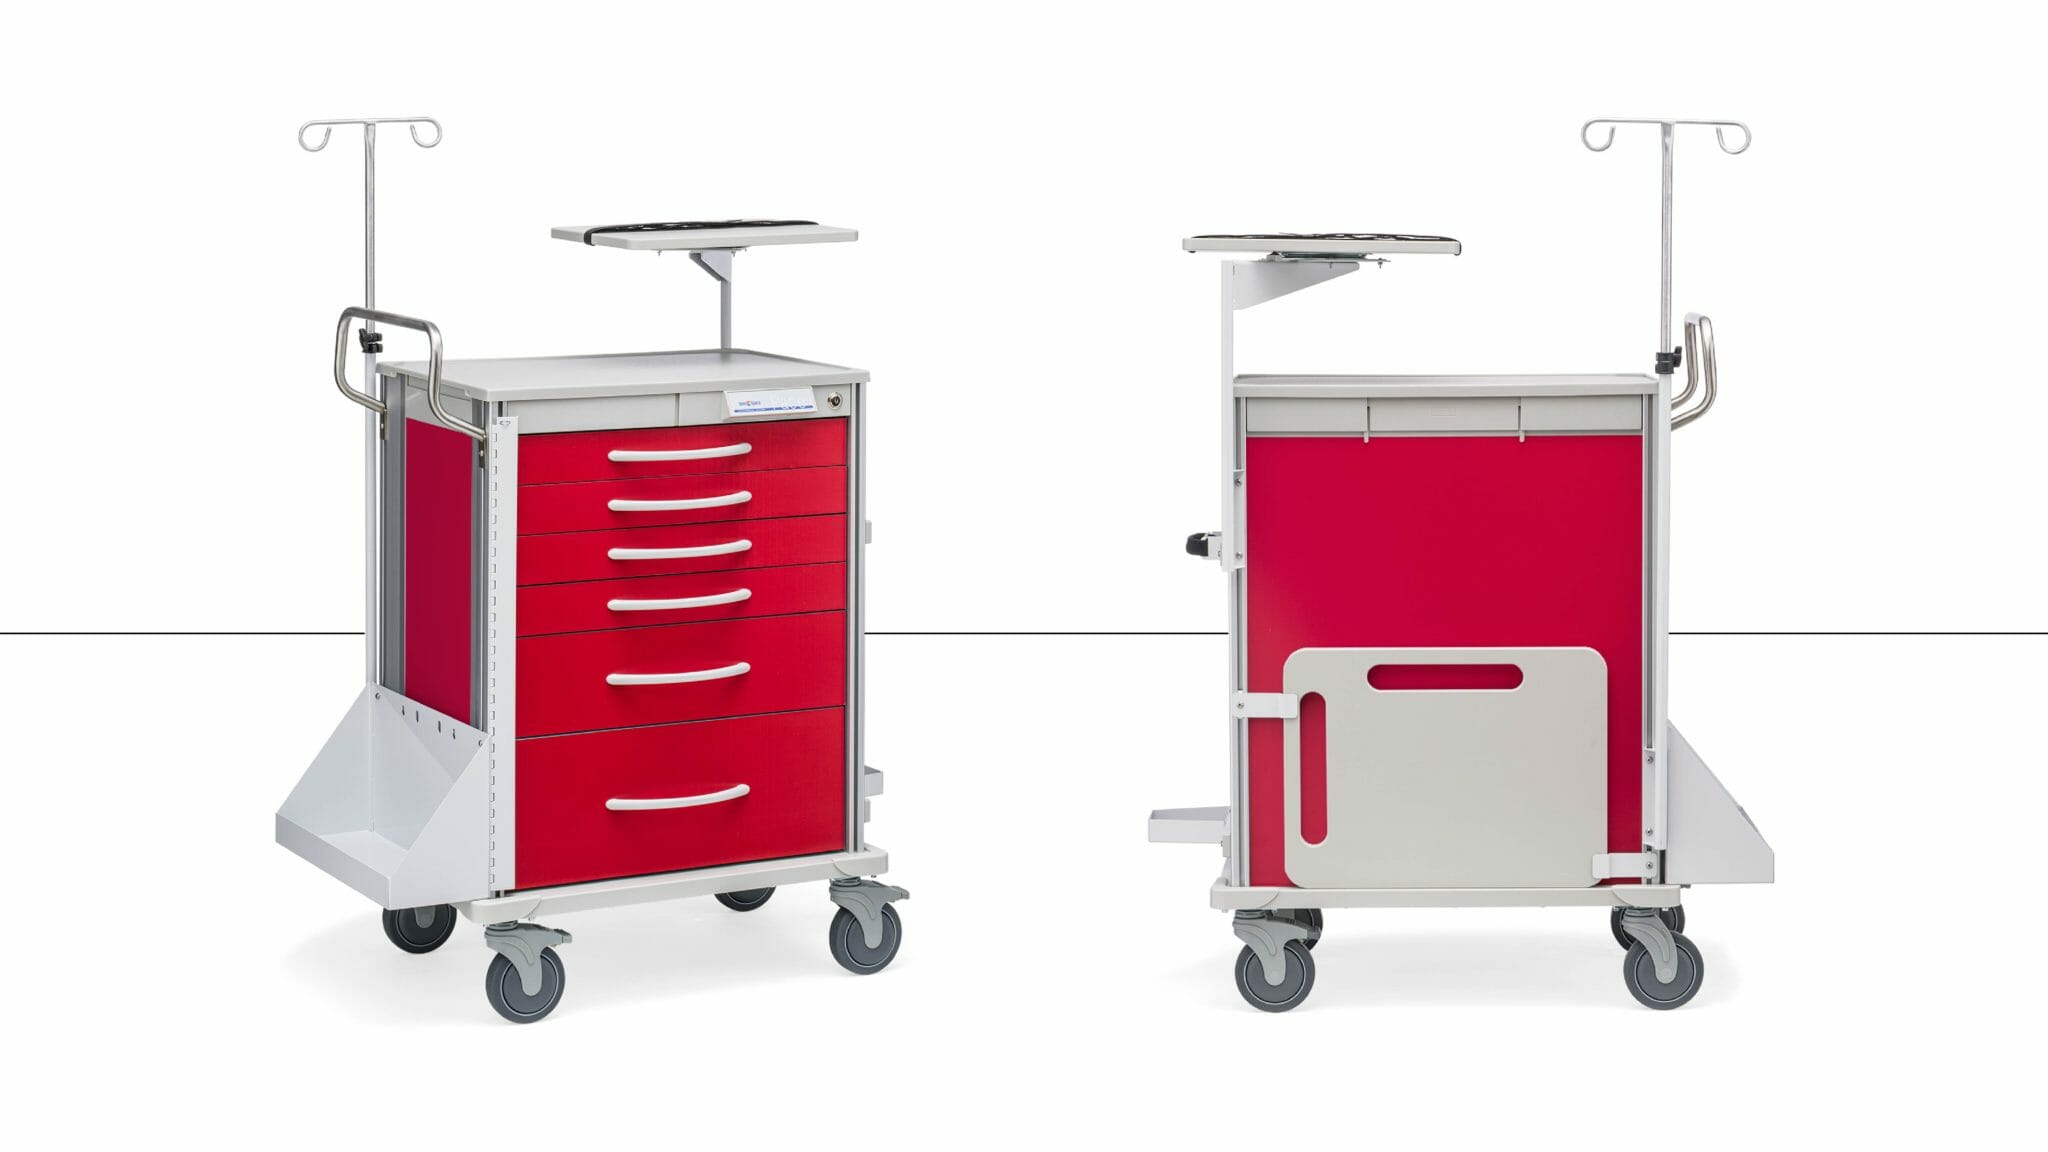 The front and back view of a crash cart from InnerSpace